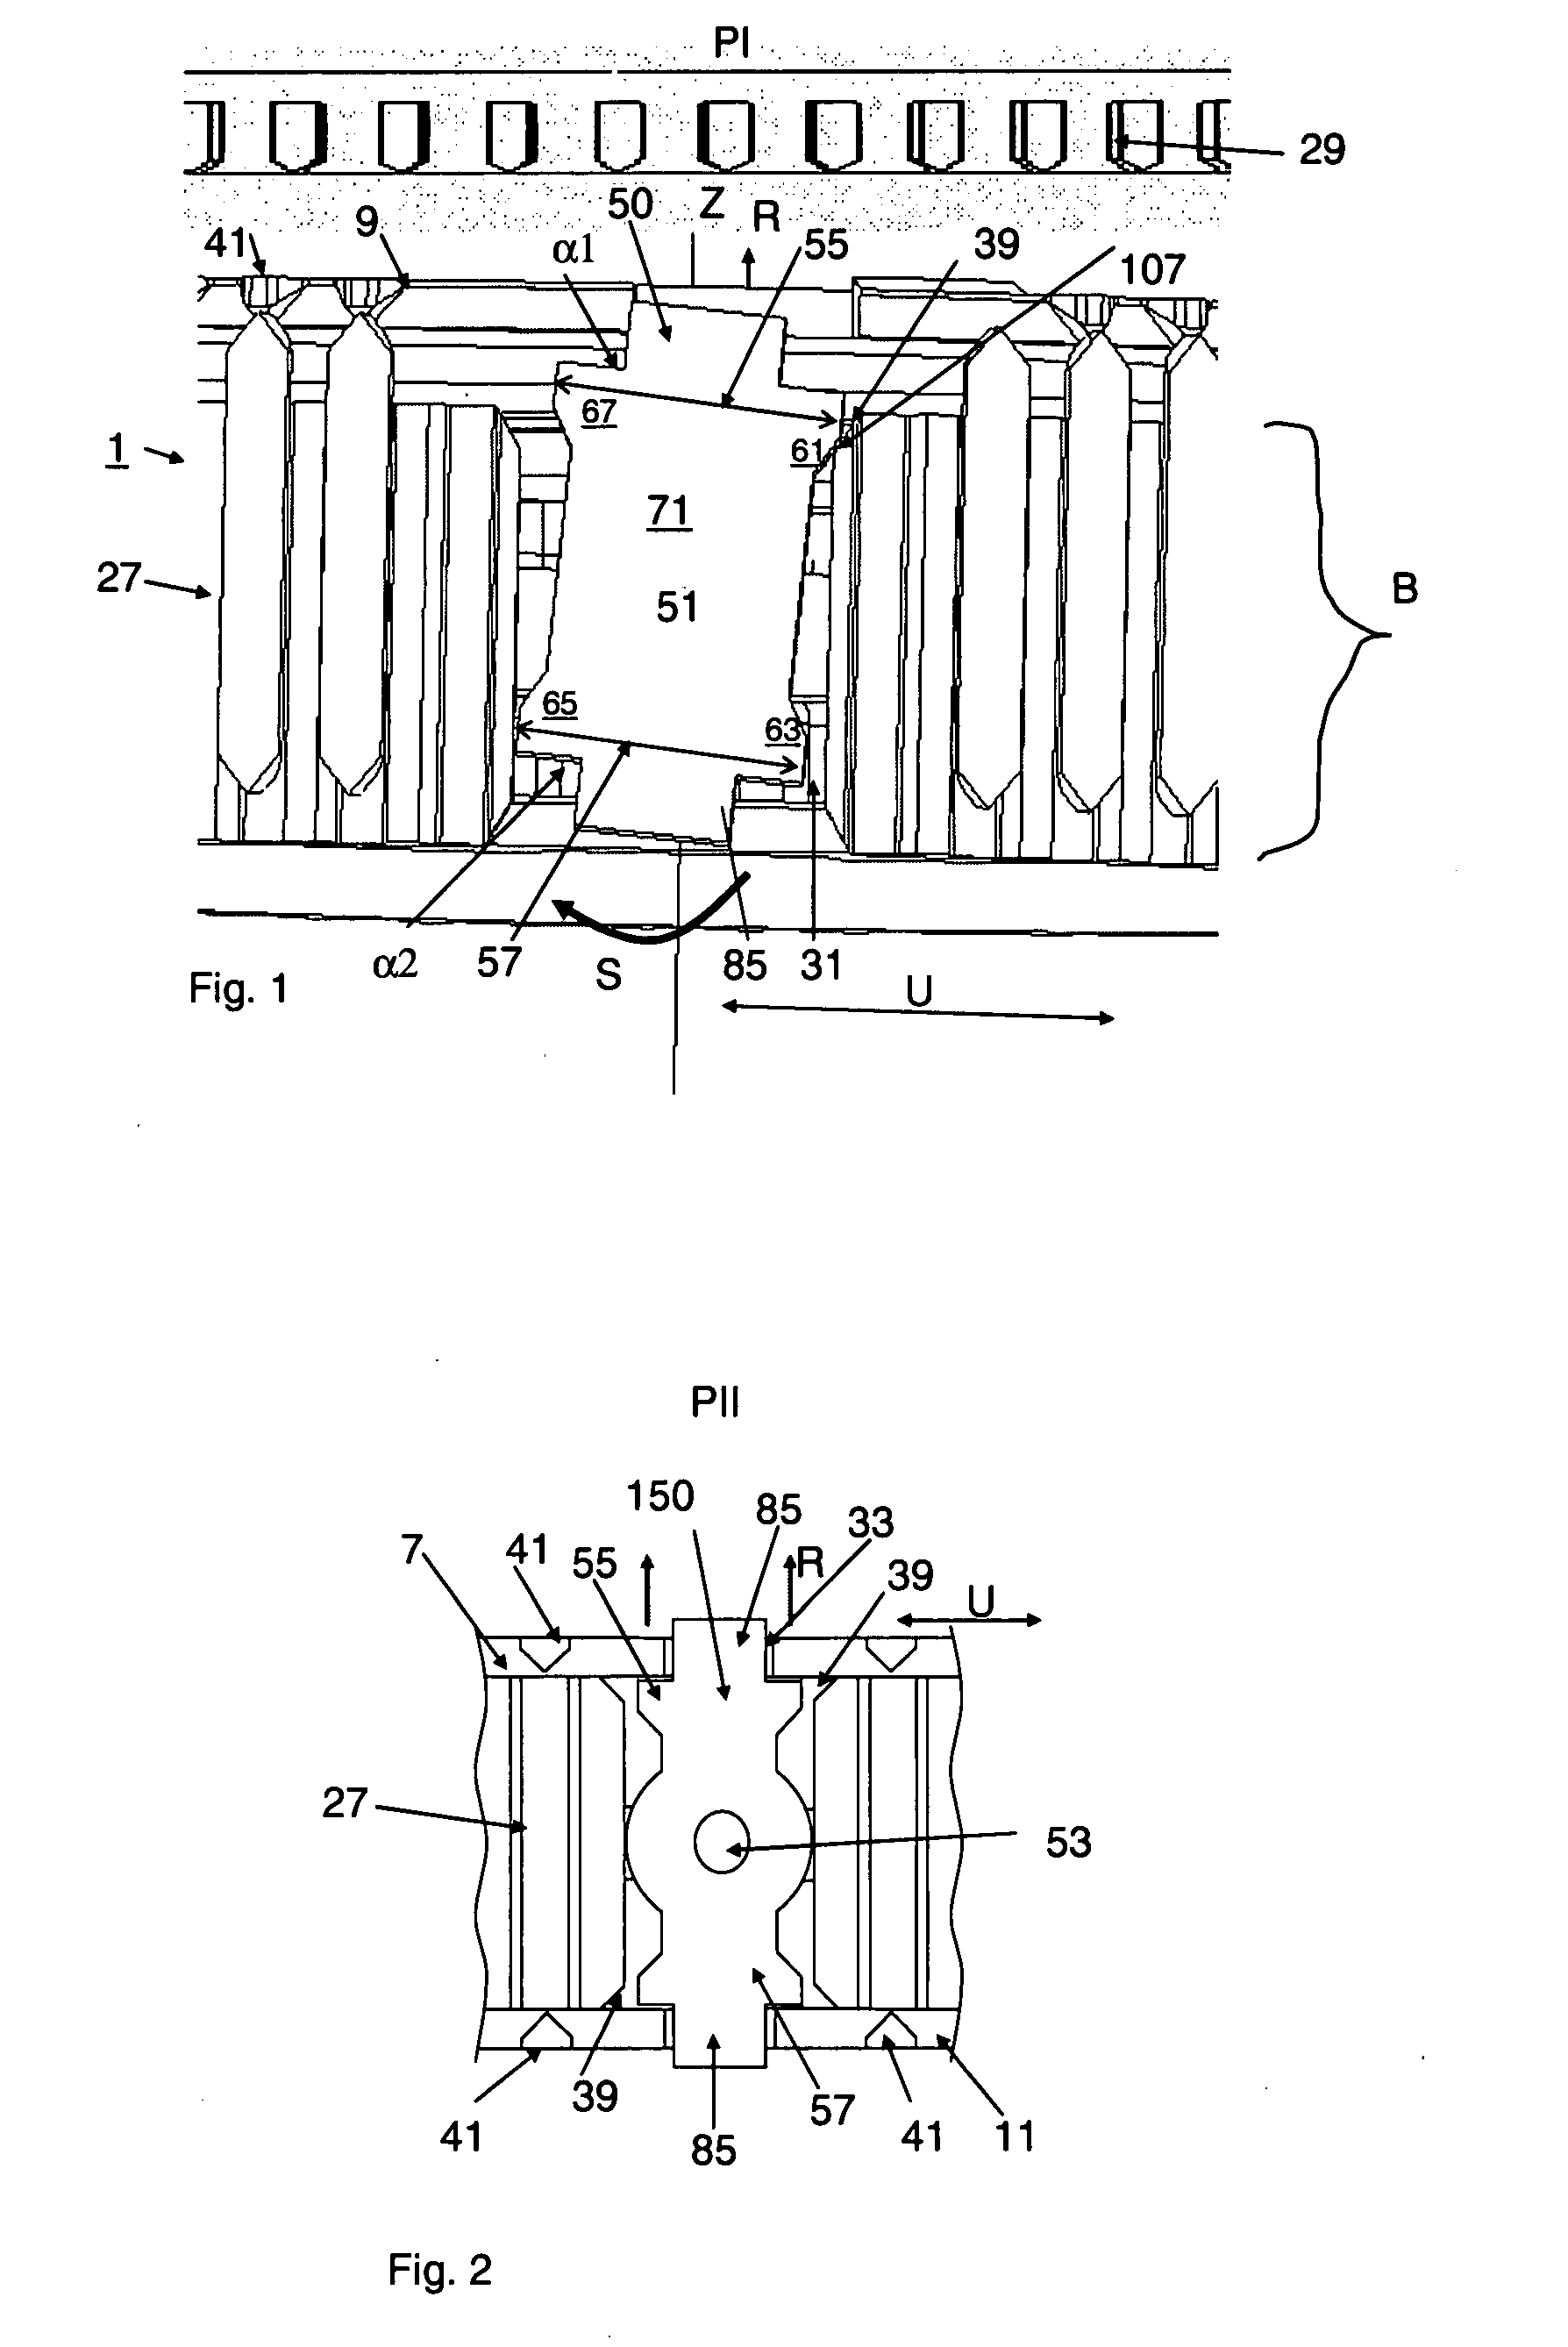 Transmission synchronizing system, in particular, in the form of a servo synchronizing system